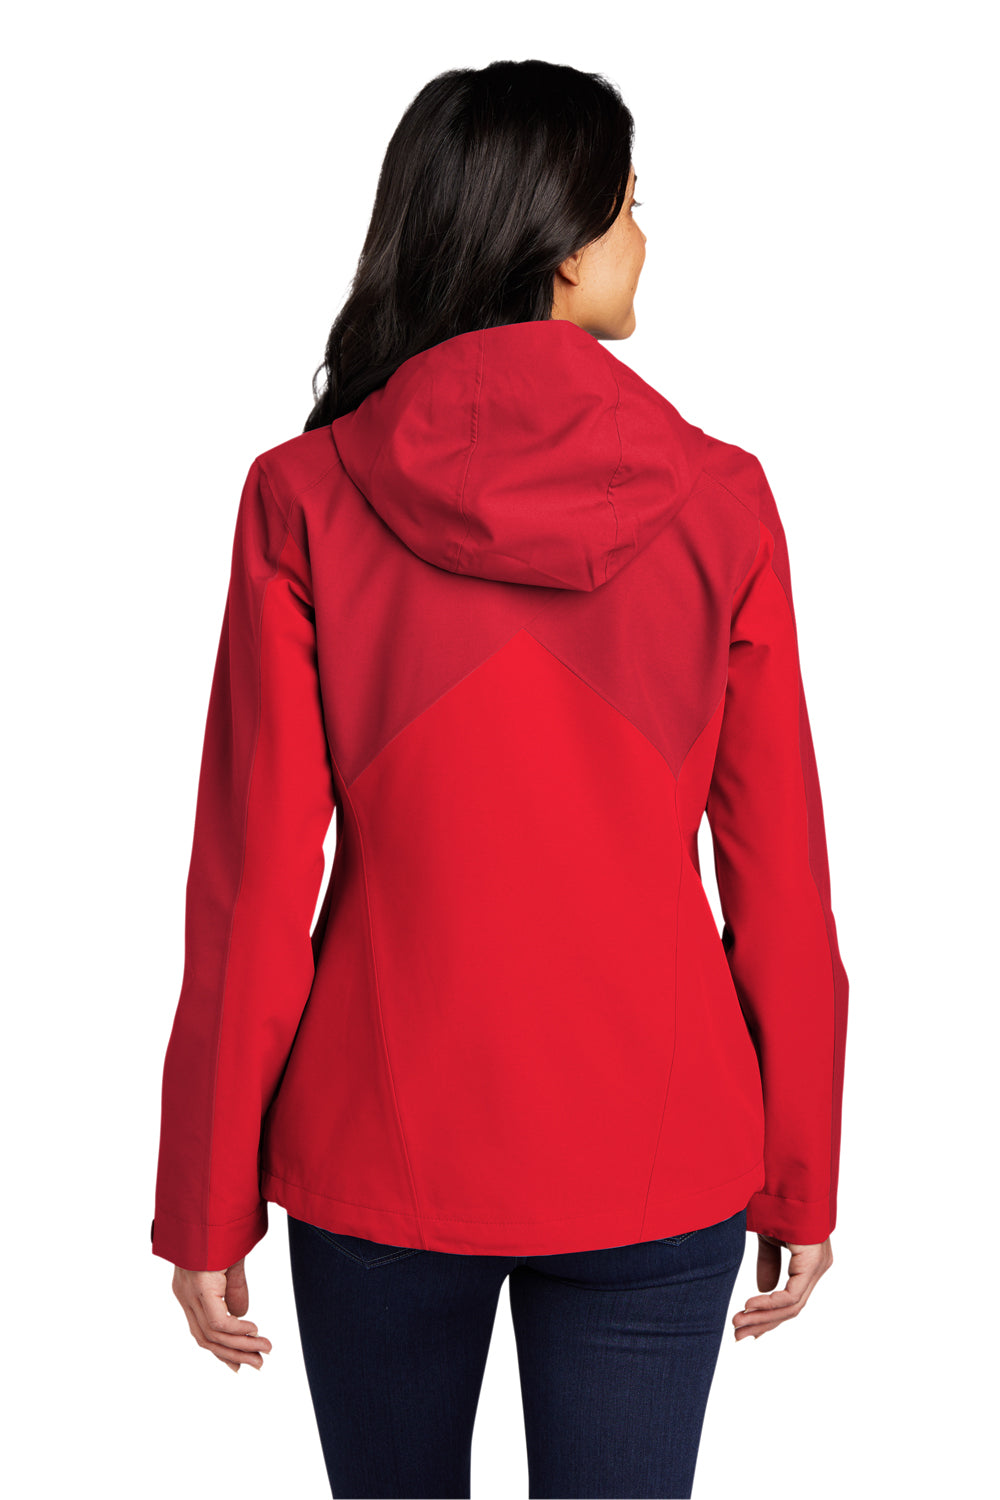 Port Authority Womens Tech Full Zip Hooded Rain Jacket Sangria Red/True Red Side